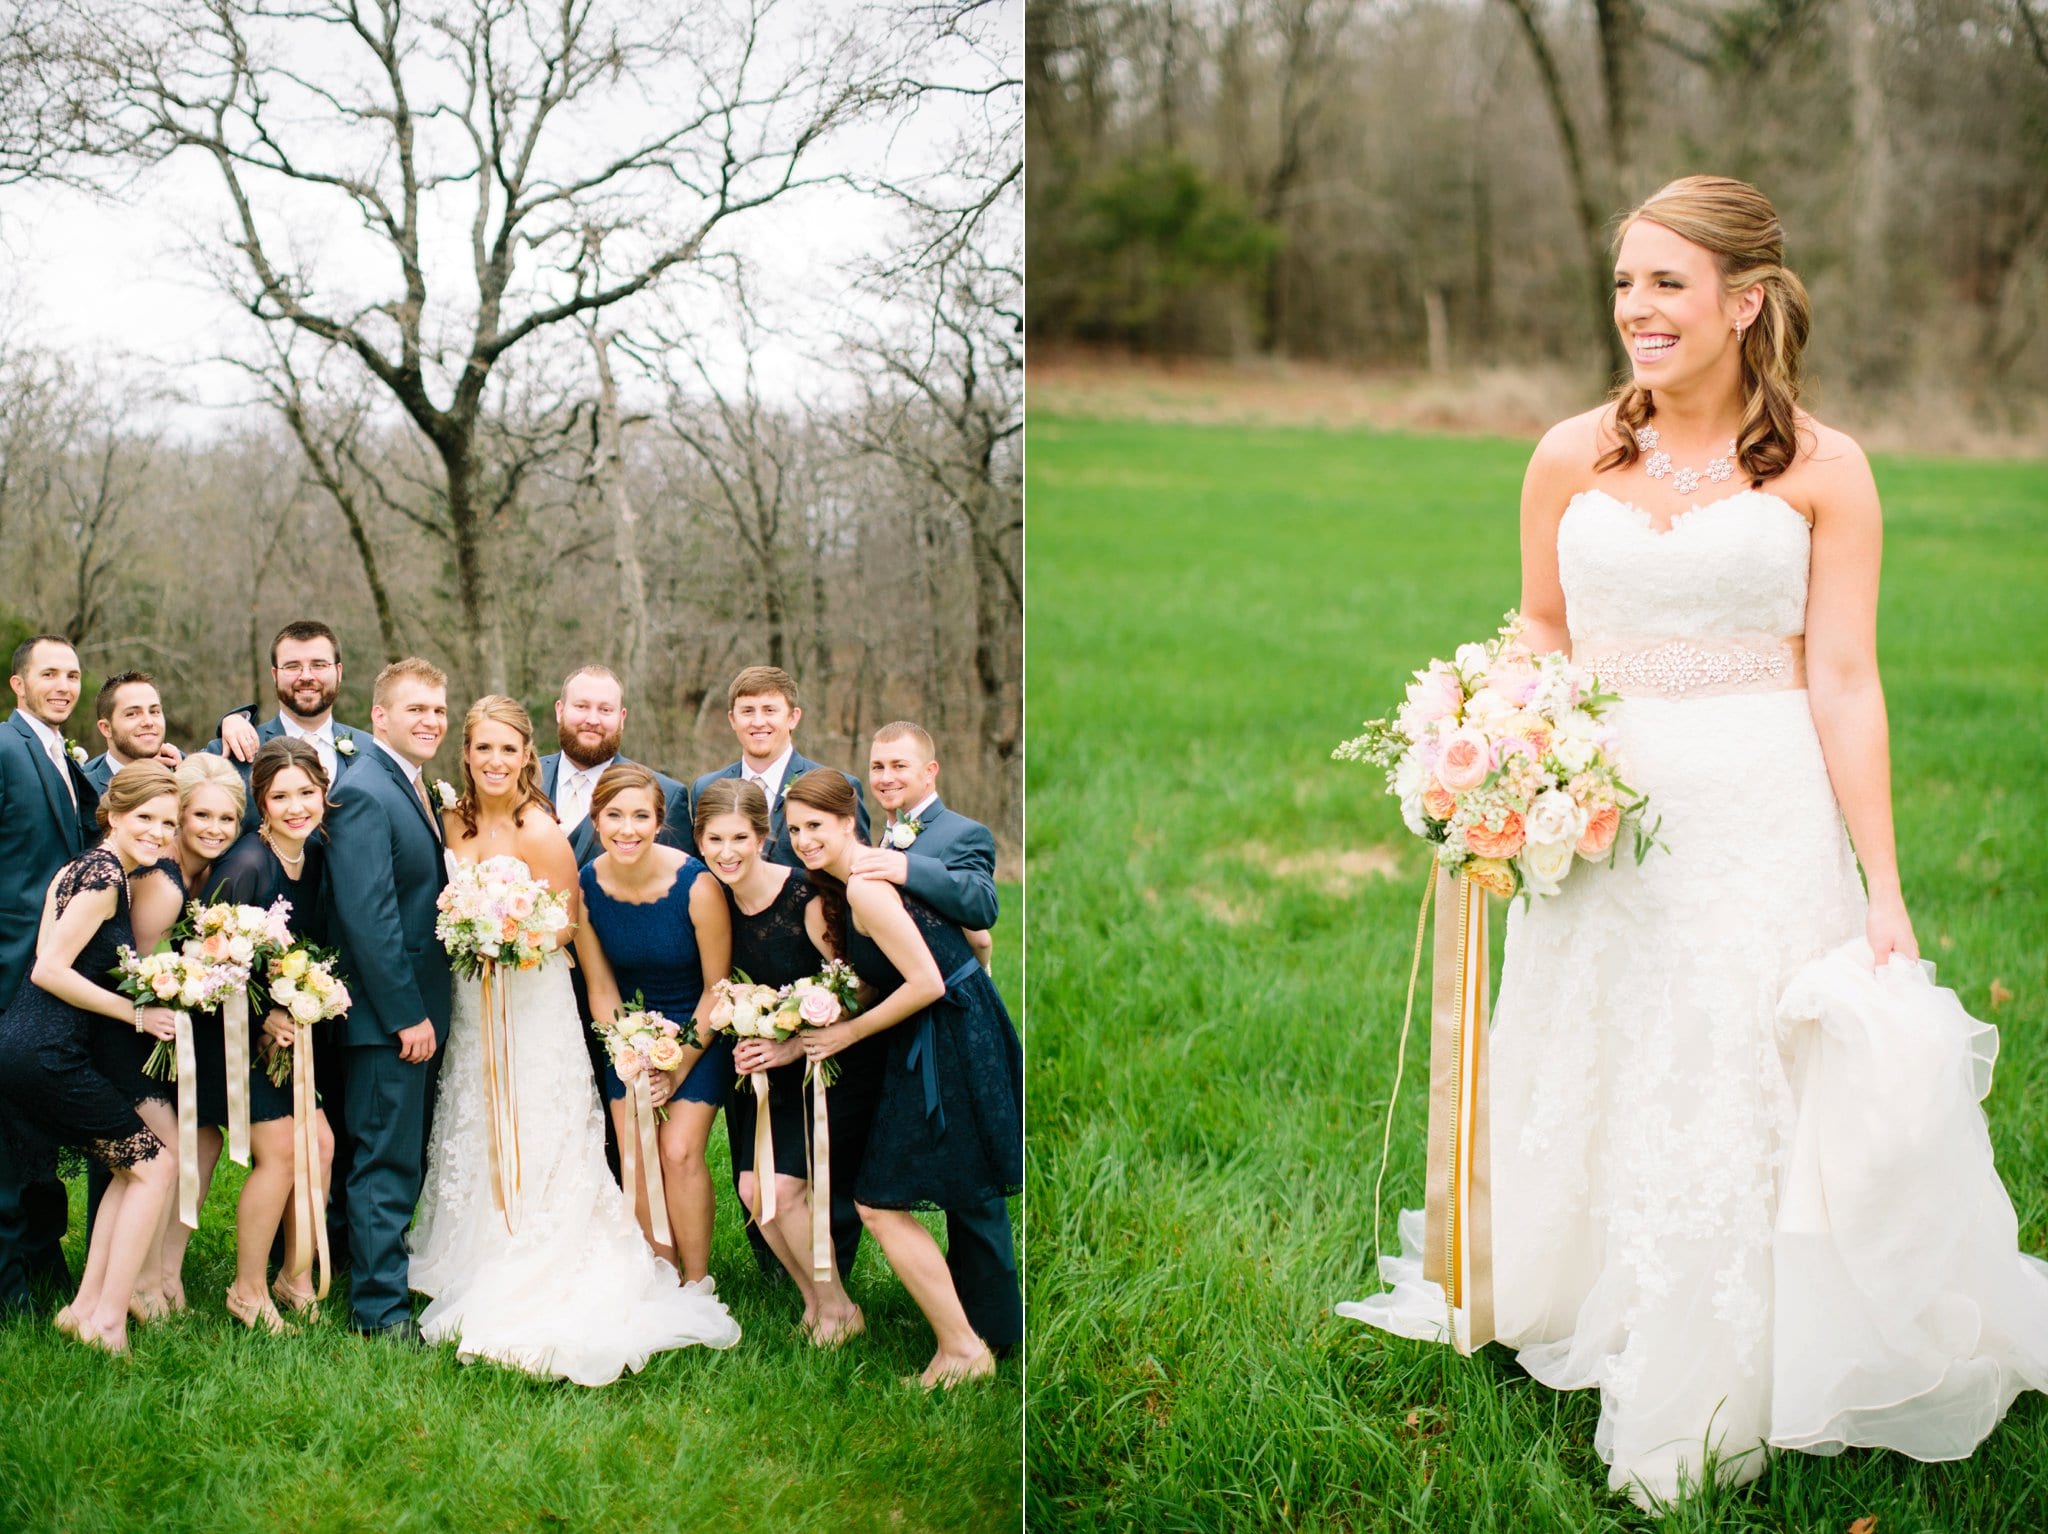 View More: http://tuckerimages.pass.us/cateswedding